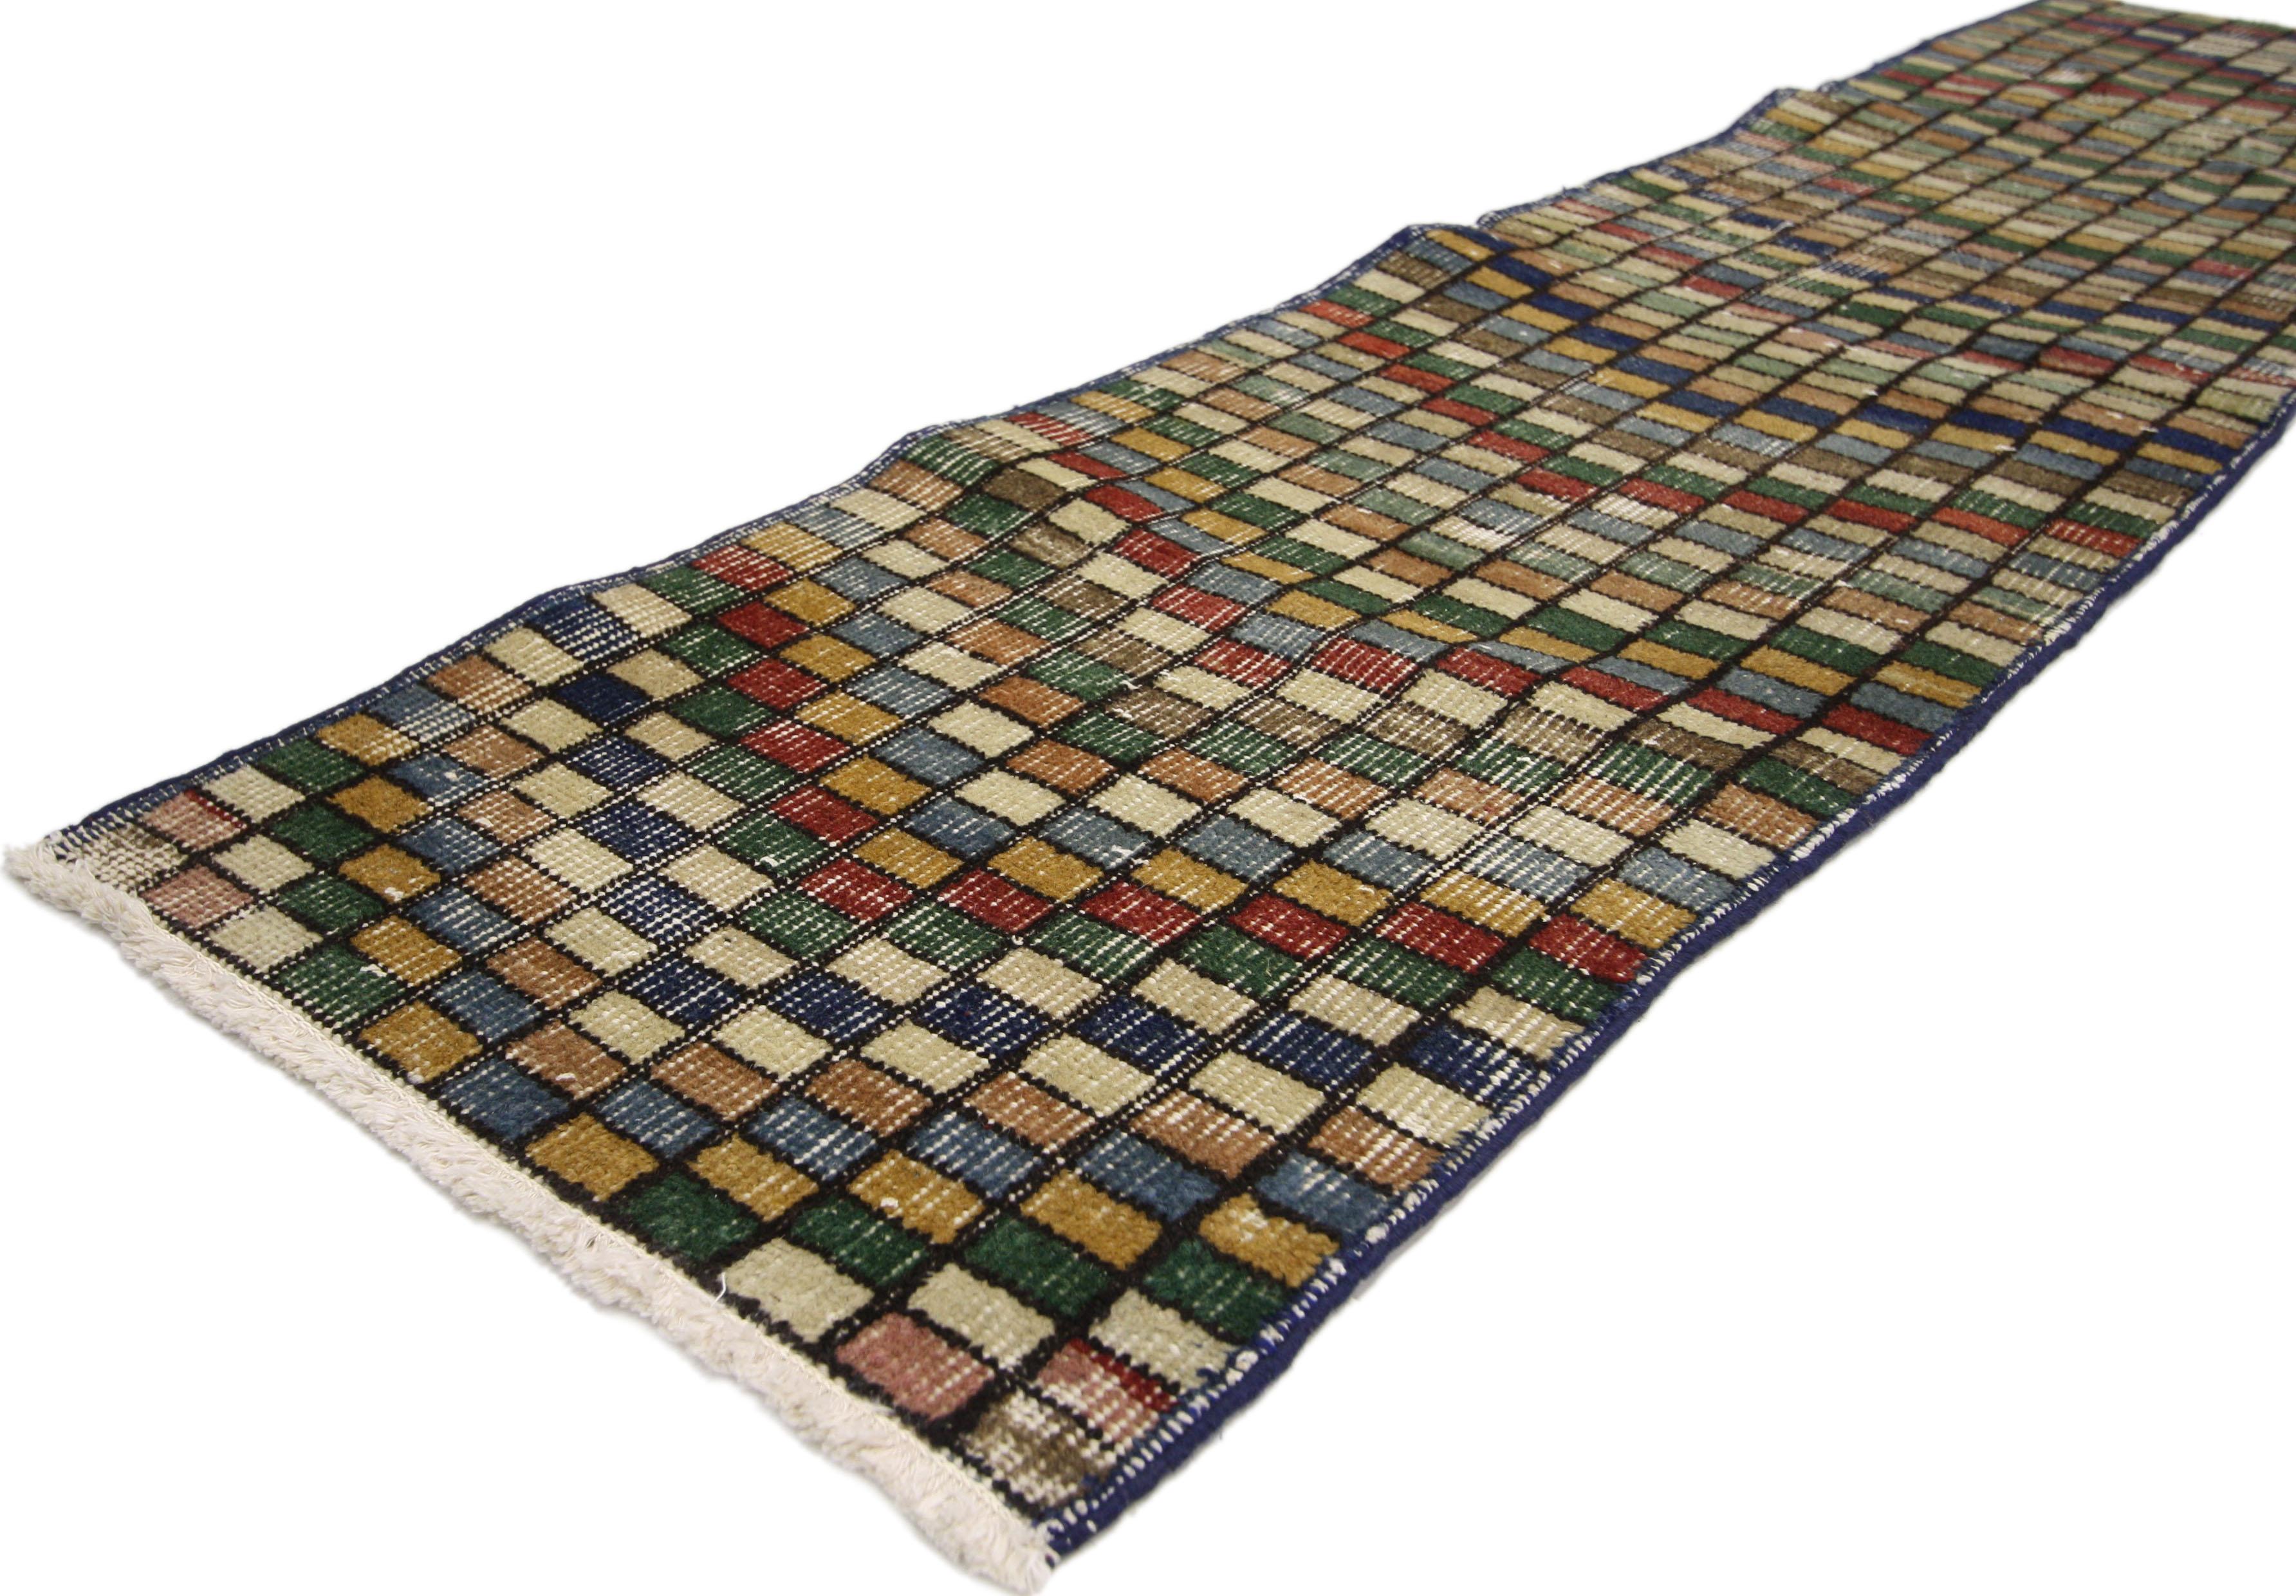 51225 Zeki Muren Distressed Vintage Turkish Sivas Runner with Cubism and Industrial Art Deco Style 01'08 X 06'04. Warm and inviting combined with a bold pattern, this hand knotted wool distressed vintage Turkish Sivas runner embodies bold Art Deco